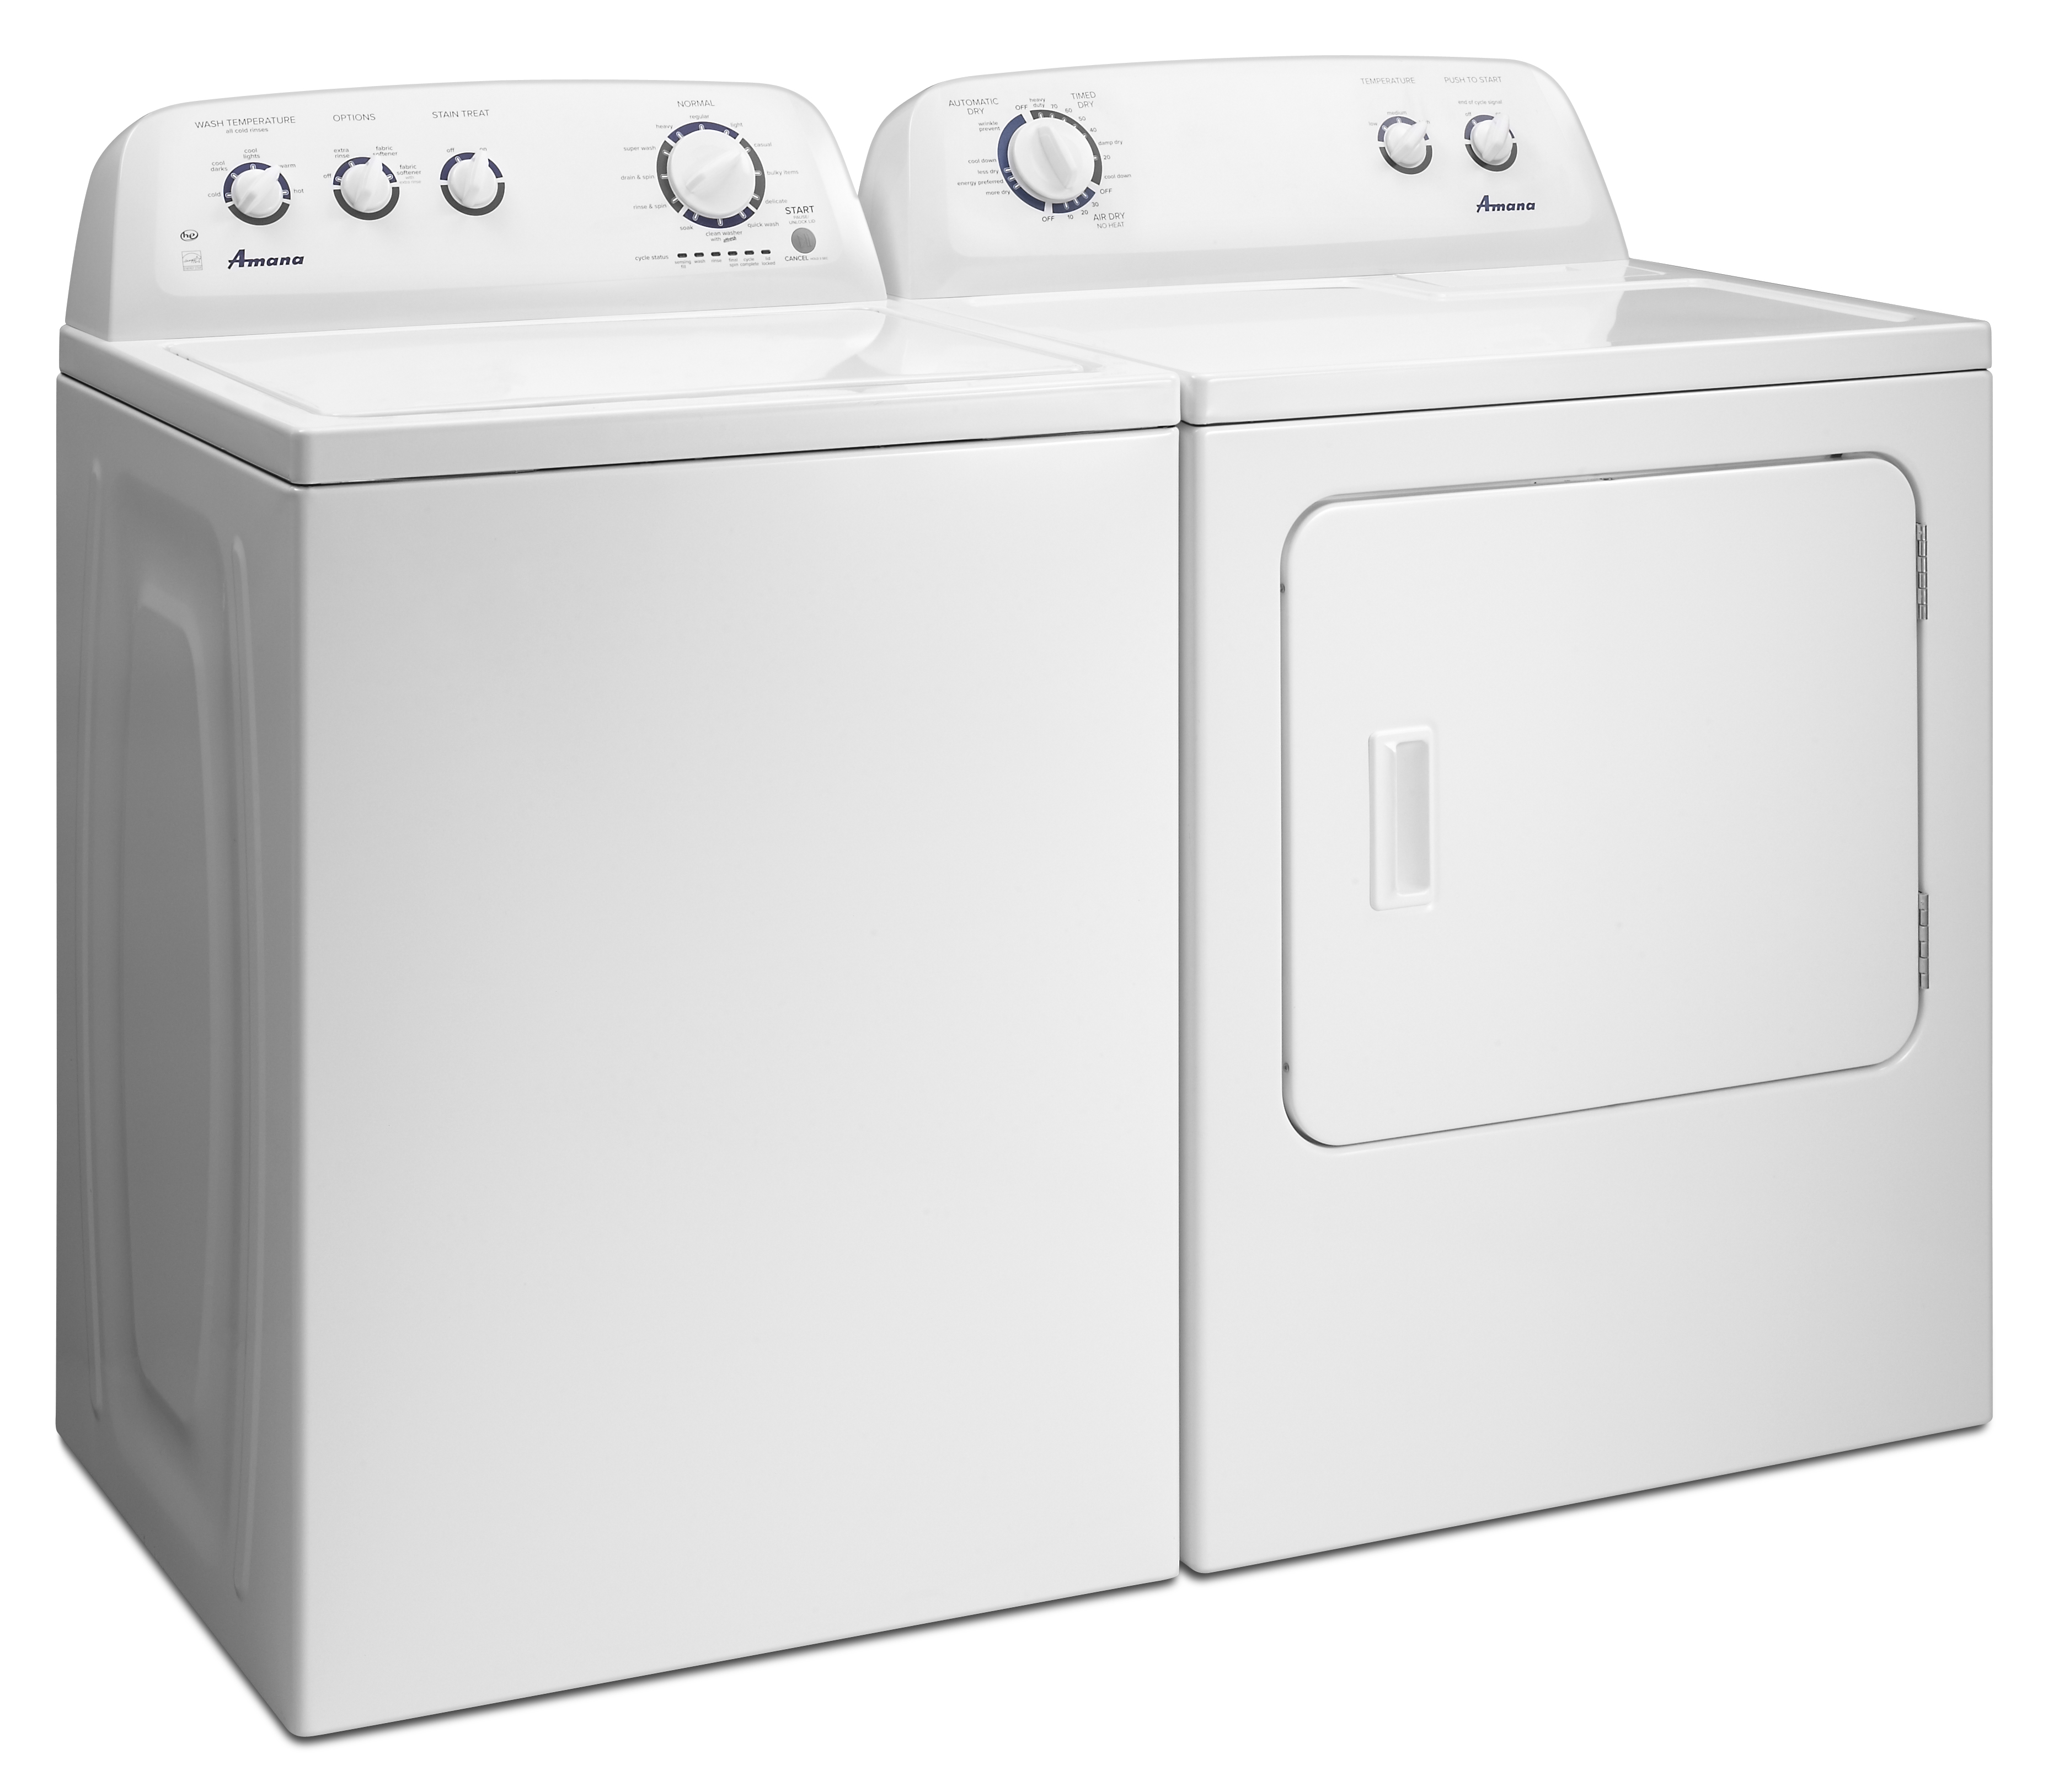 laundry-pair-ned4700yq-and-ntw4750yq